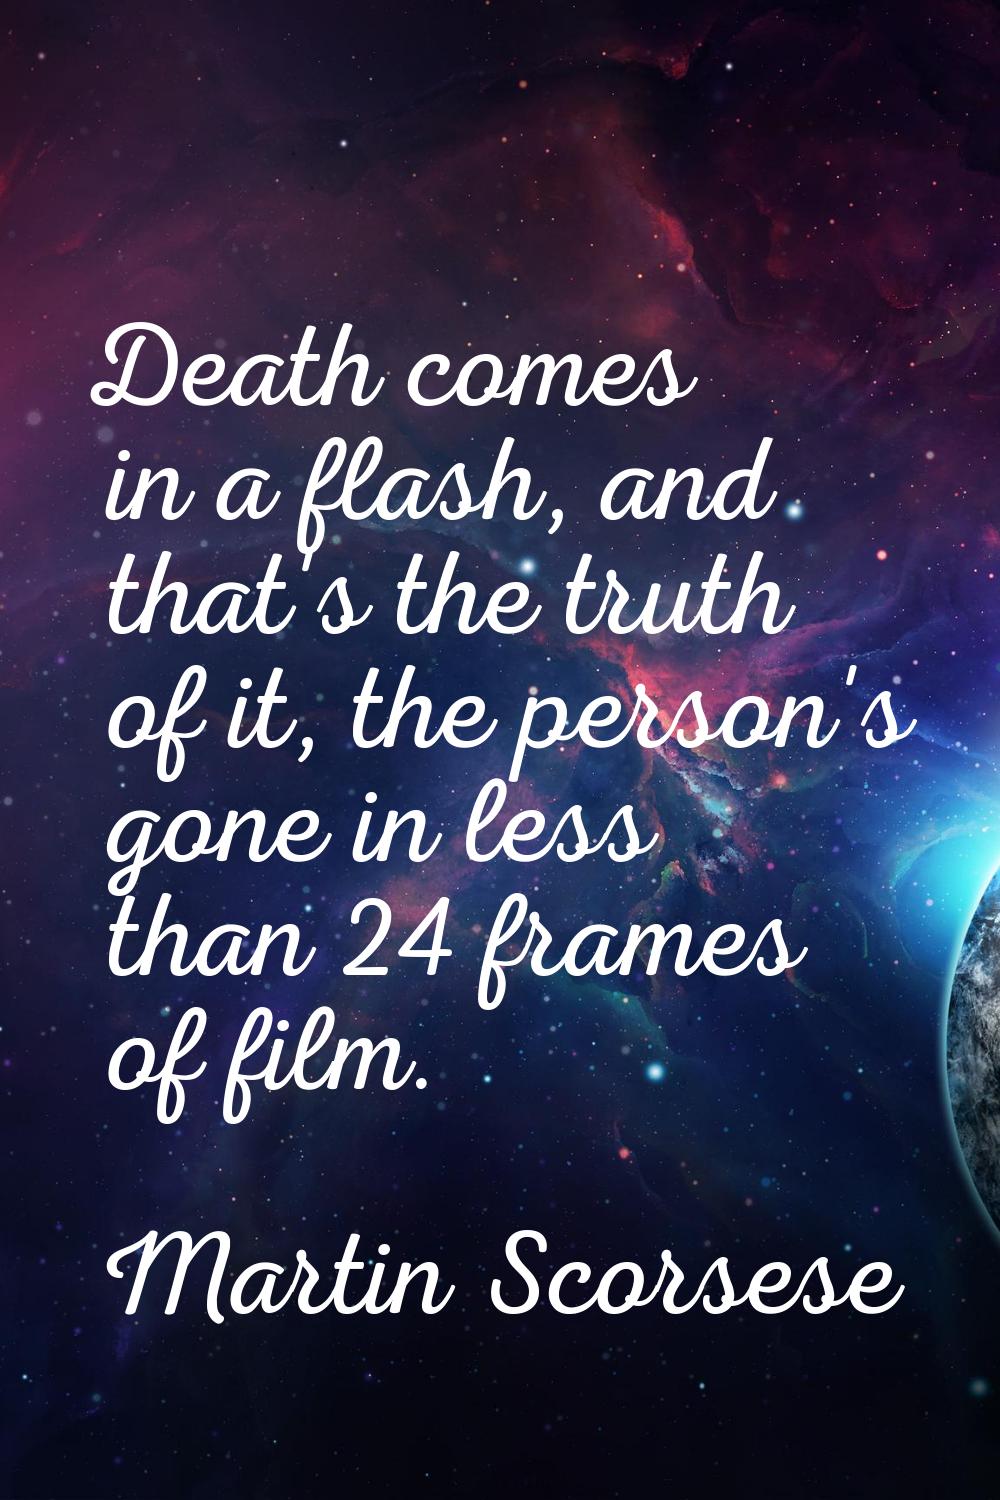 Death comes in a flash, and that's the truth of it, the person's gone in less than 24 frames of fil